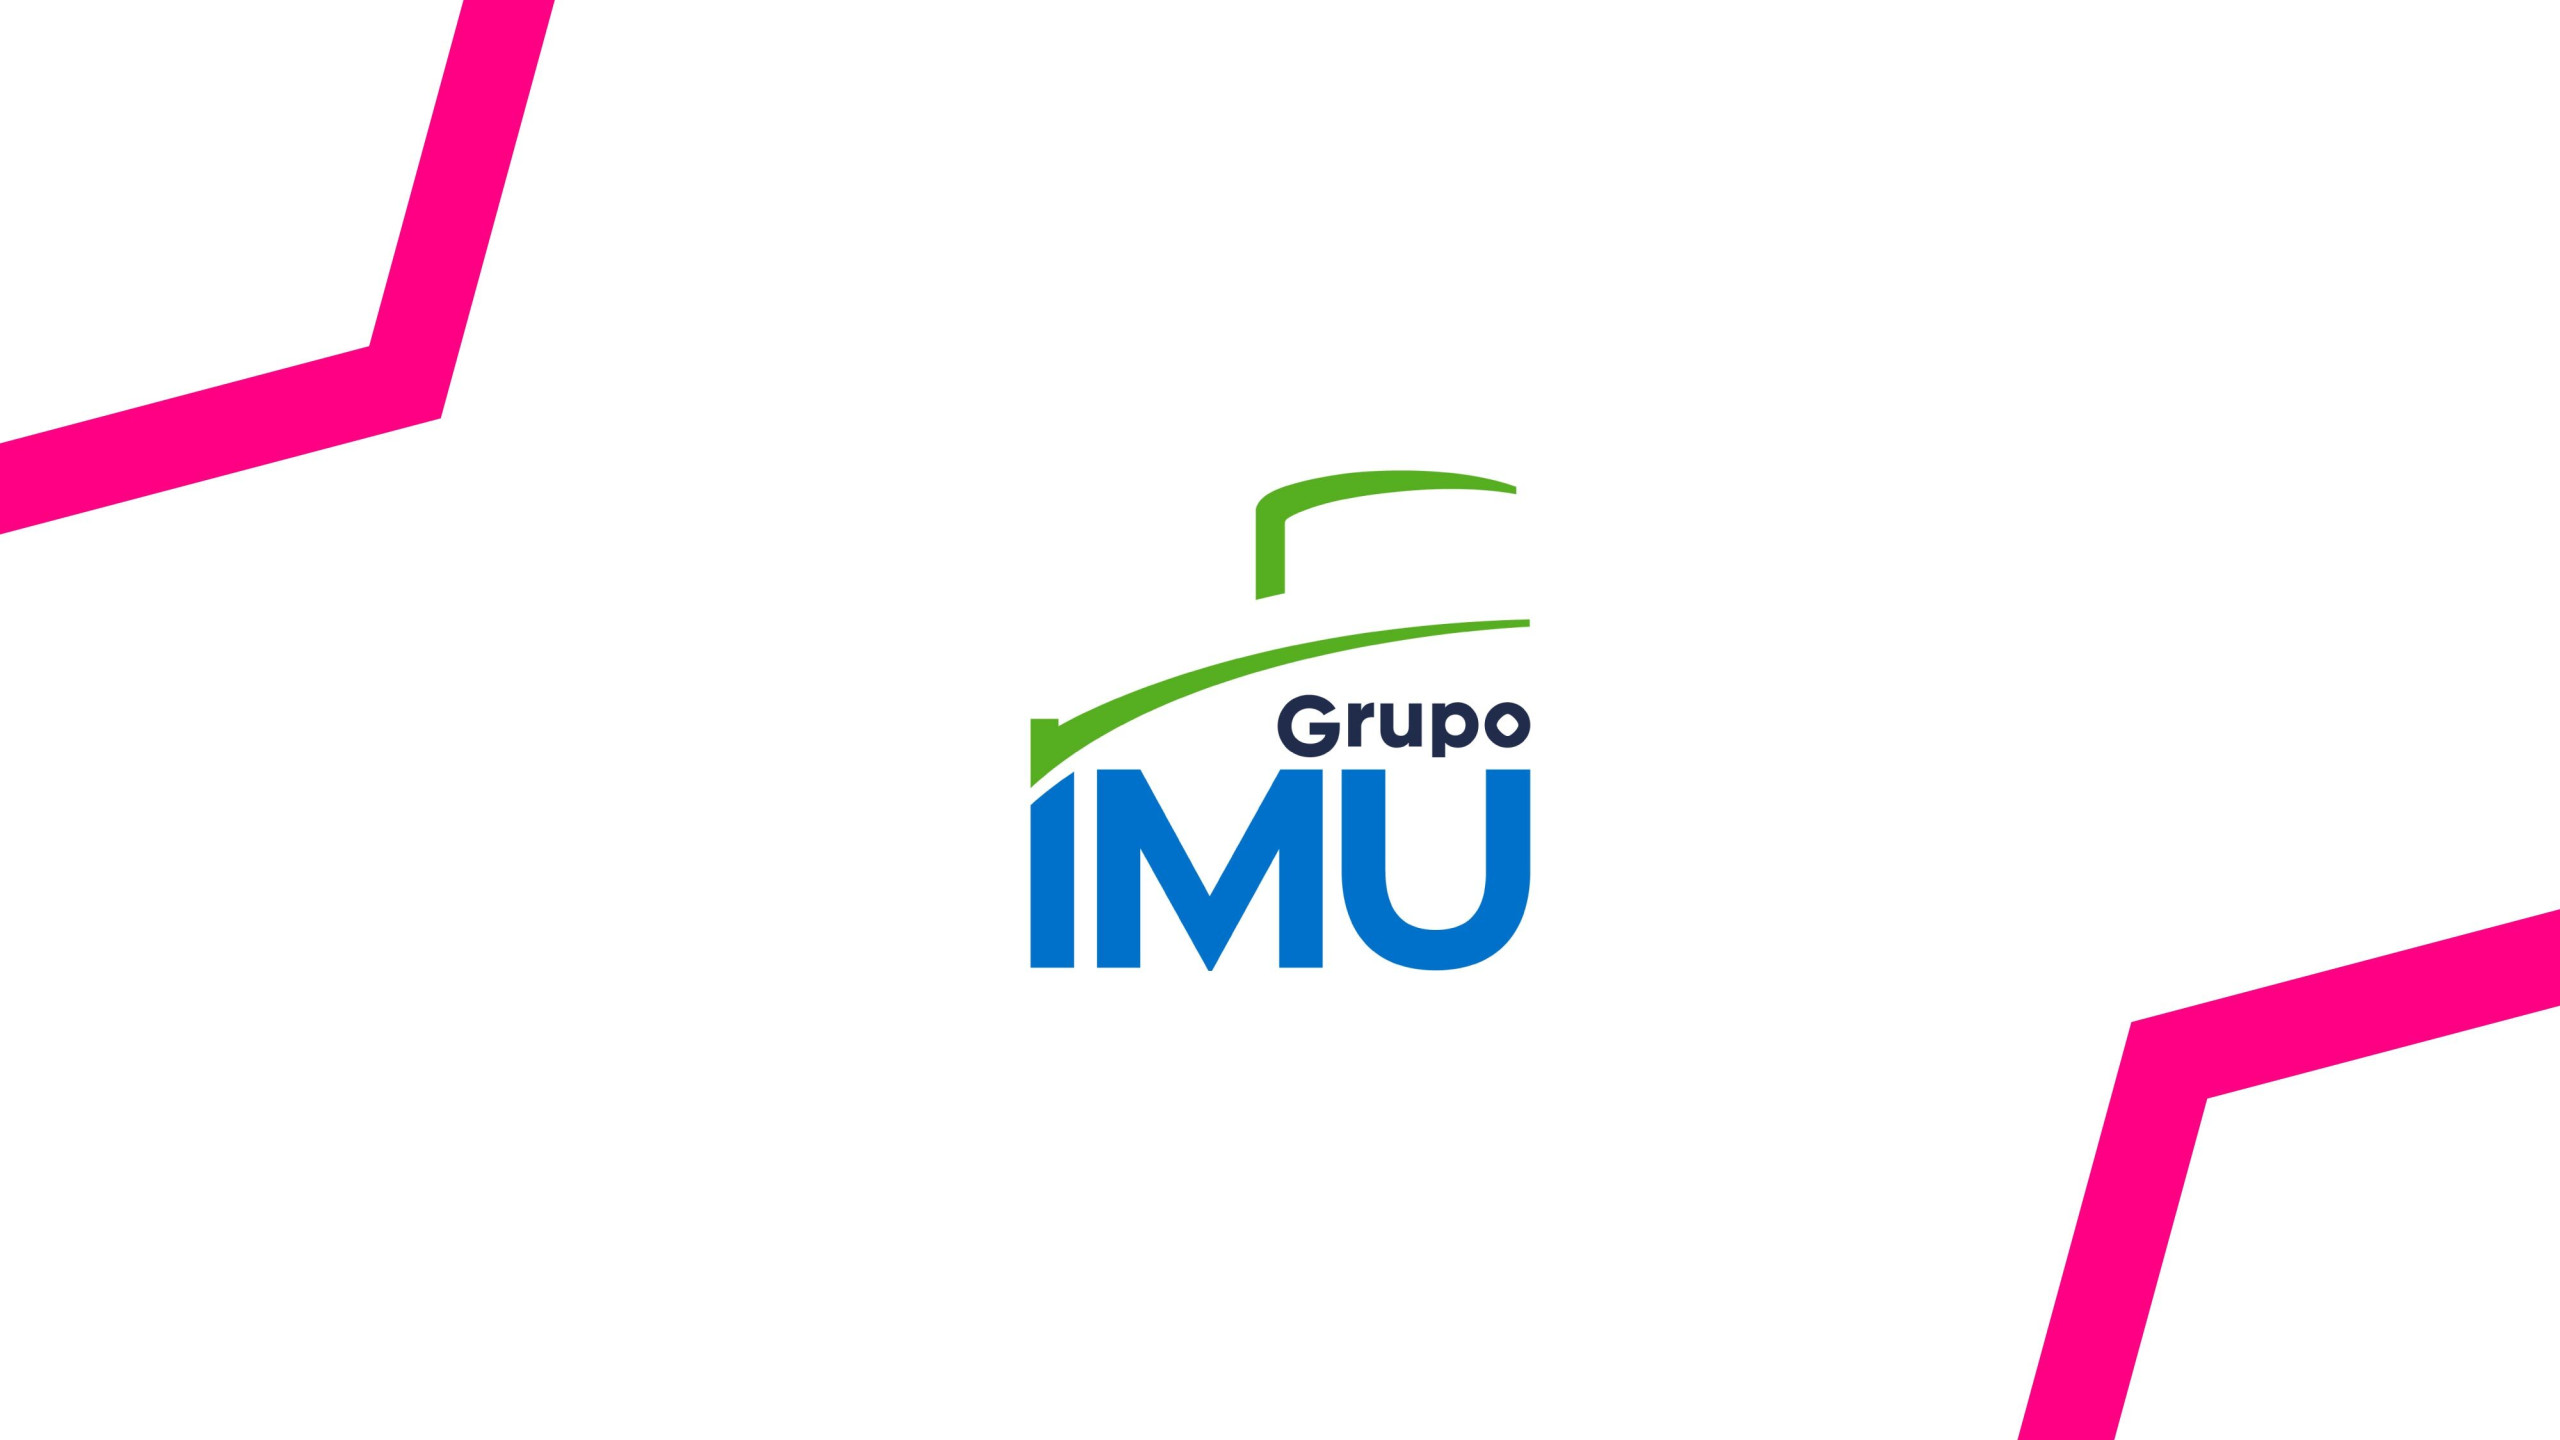 Partnership to make Grupo IMU’s high impact DOOH inventory available programmatically to advertisers on a local and global scale